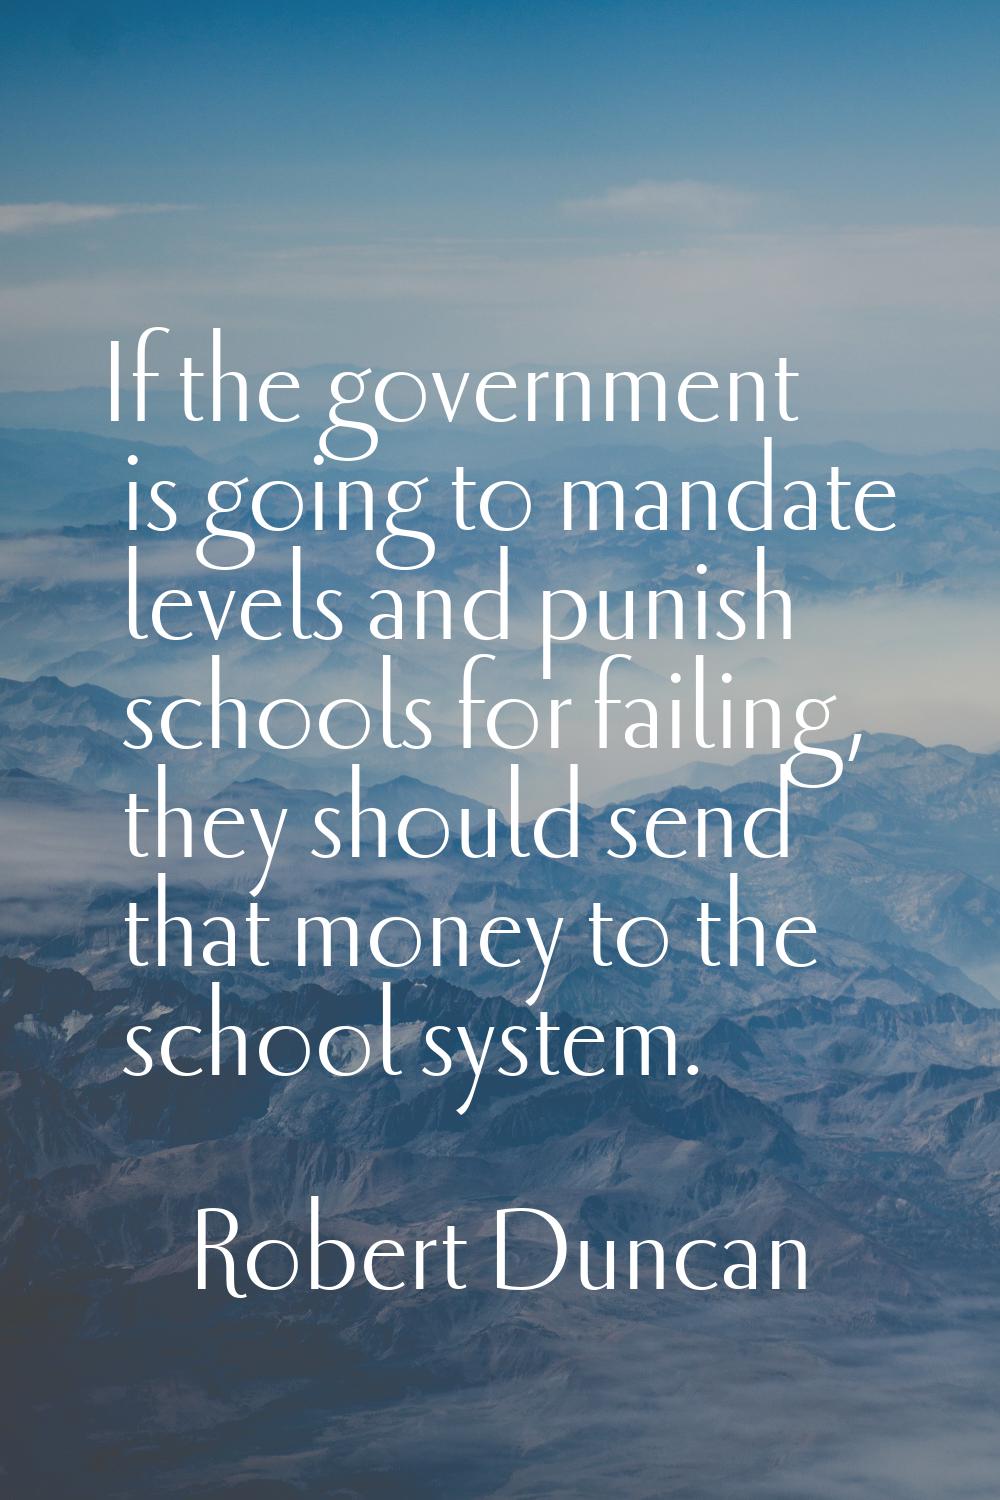 If the government is going to mandate levels and punish schools for failing, they should send that 